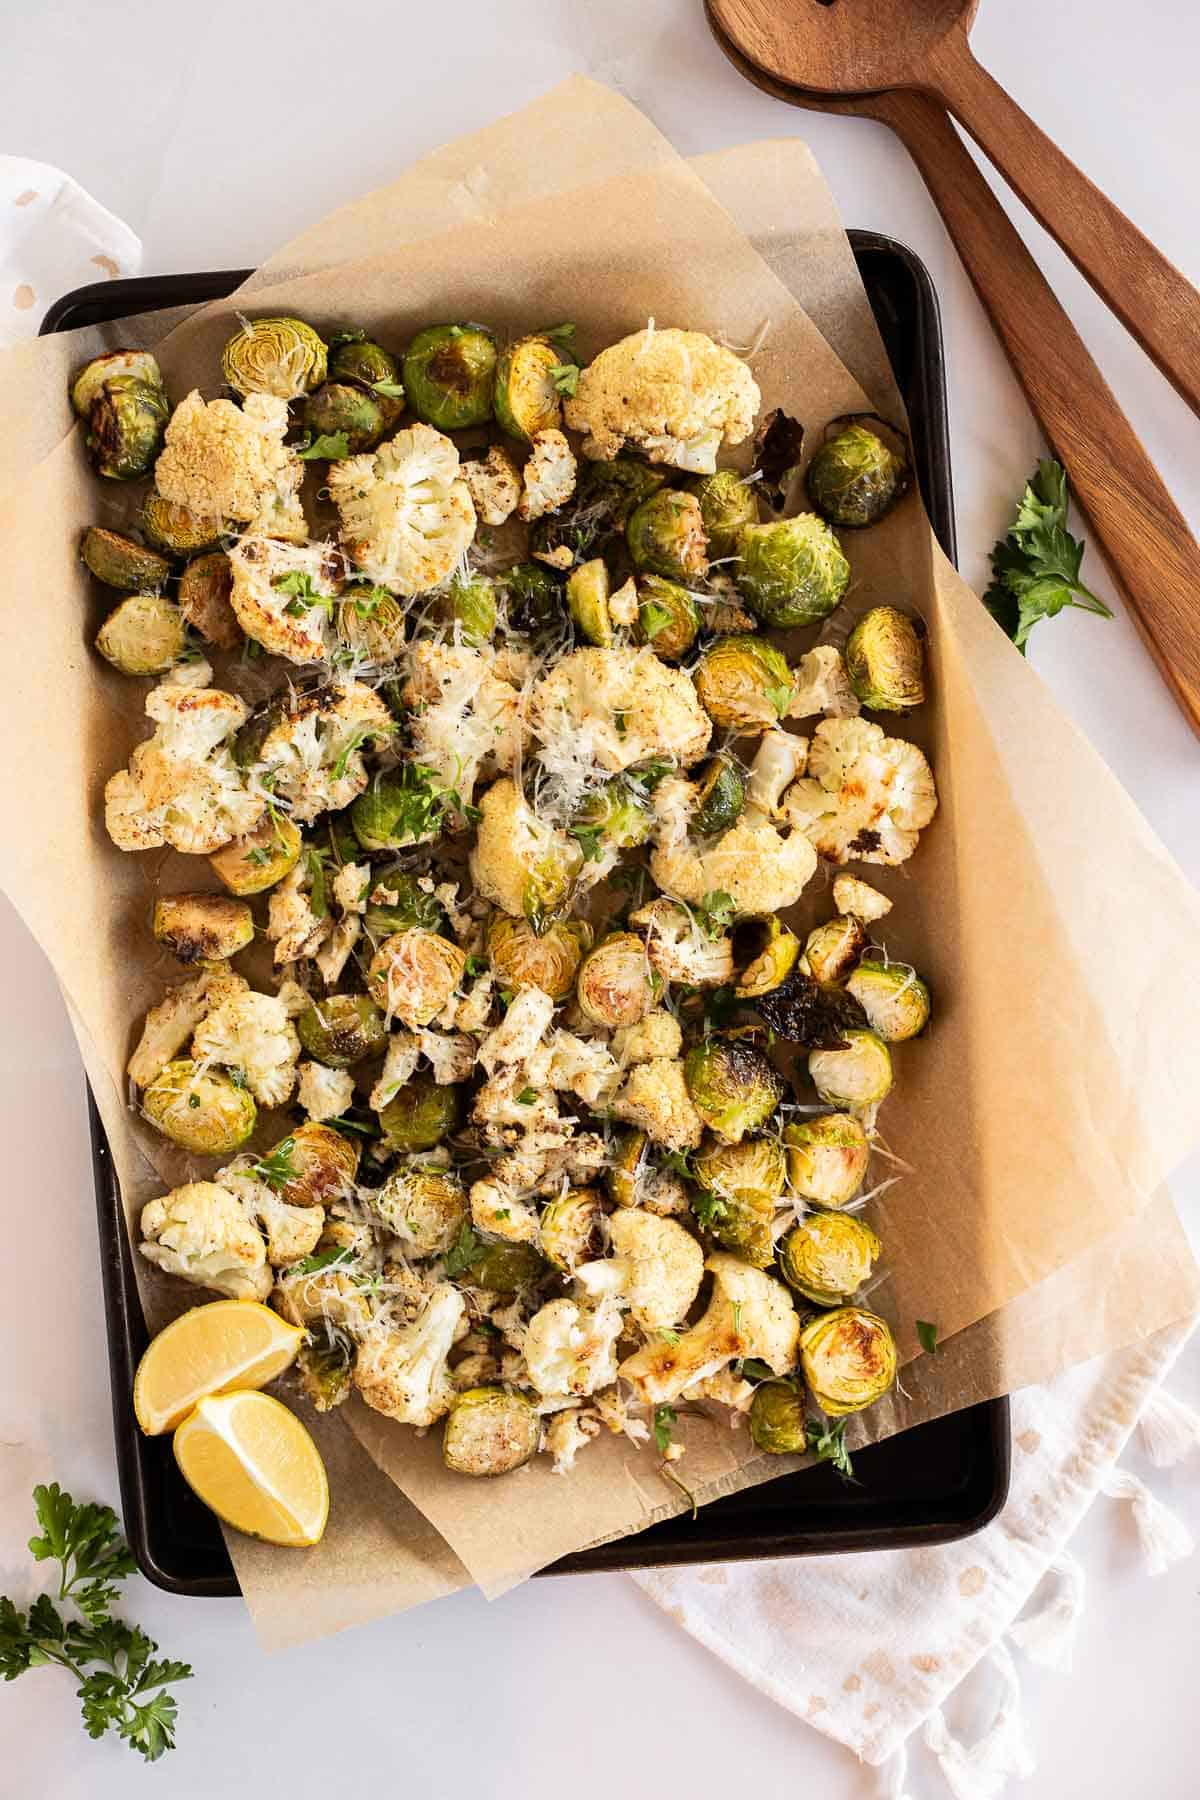 Roasted cauliflower & Brussels sprouts with Parmesan cheese on a parchment lined baking sheet.